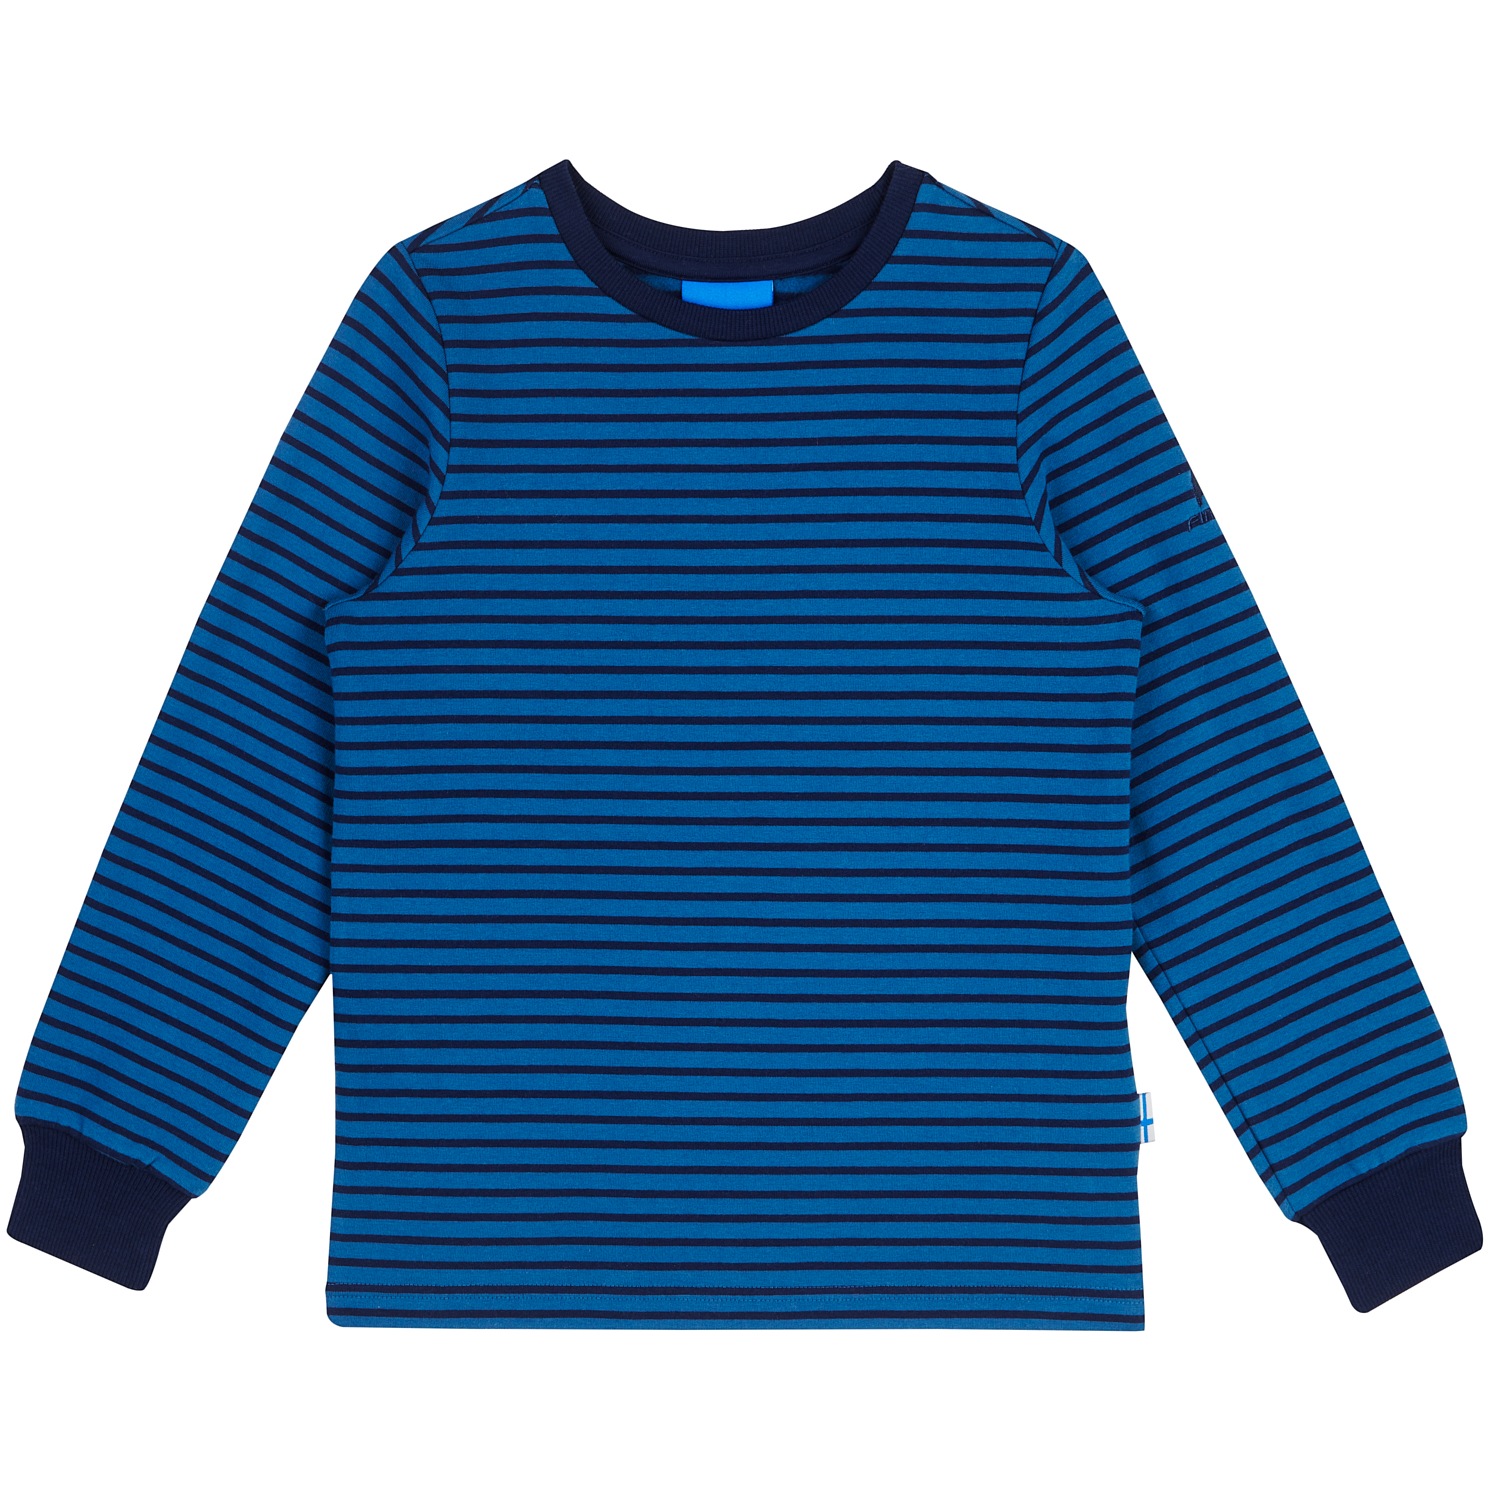 Picture of Finkid RIVI Longsleeve Sweat Shirt Kids - real teal/navy